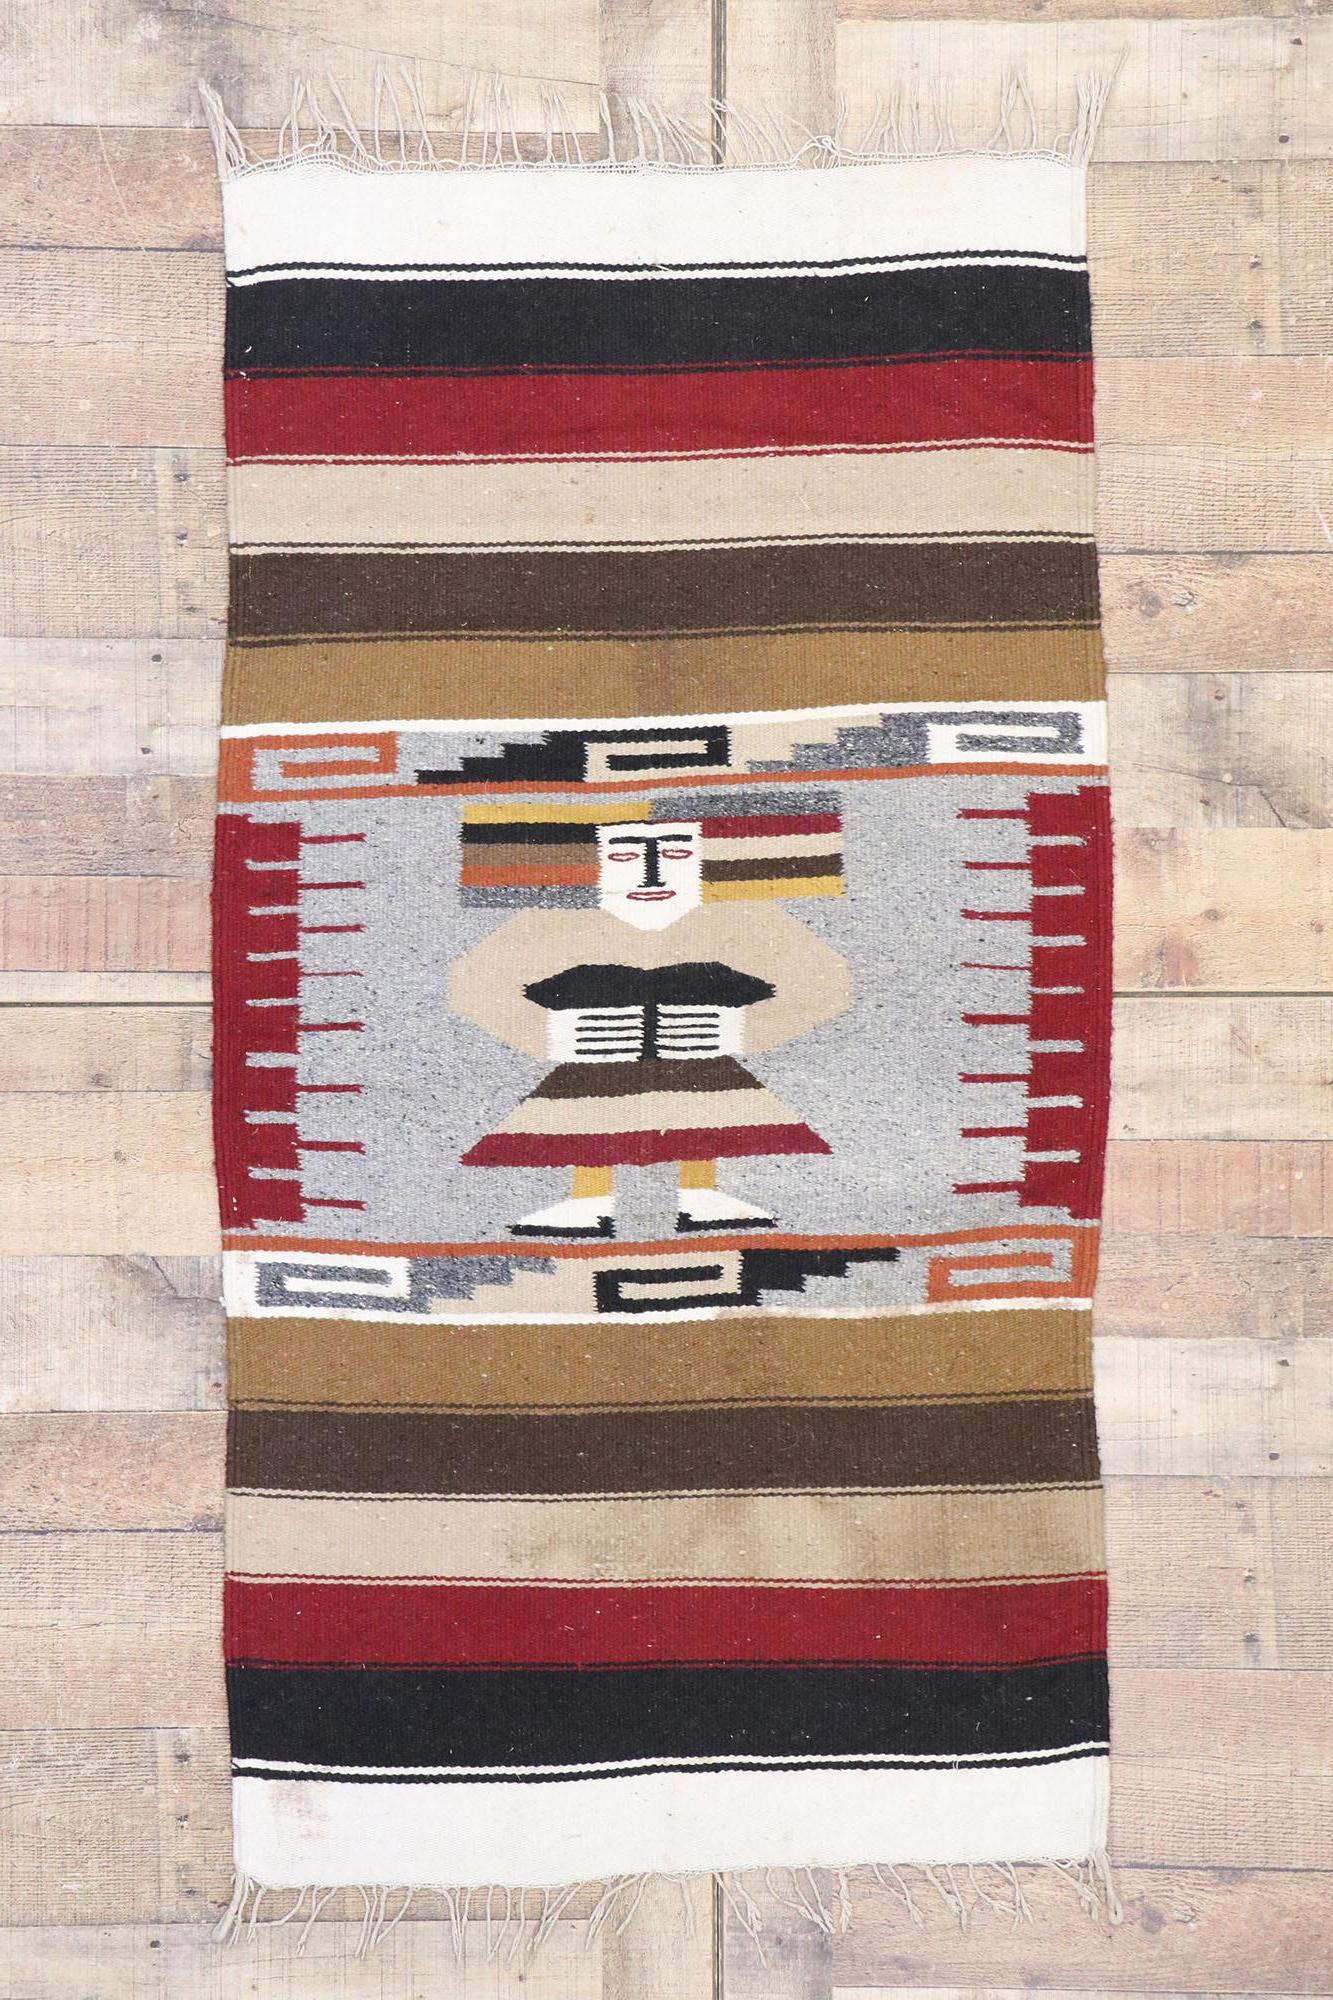 Hand-Woven Vintage Mexican Blanket with Aztec Figure, Throw Rug For Sale